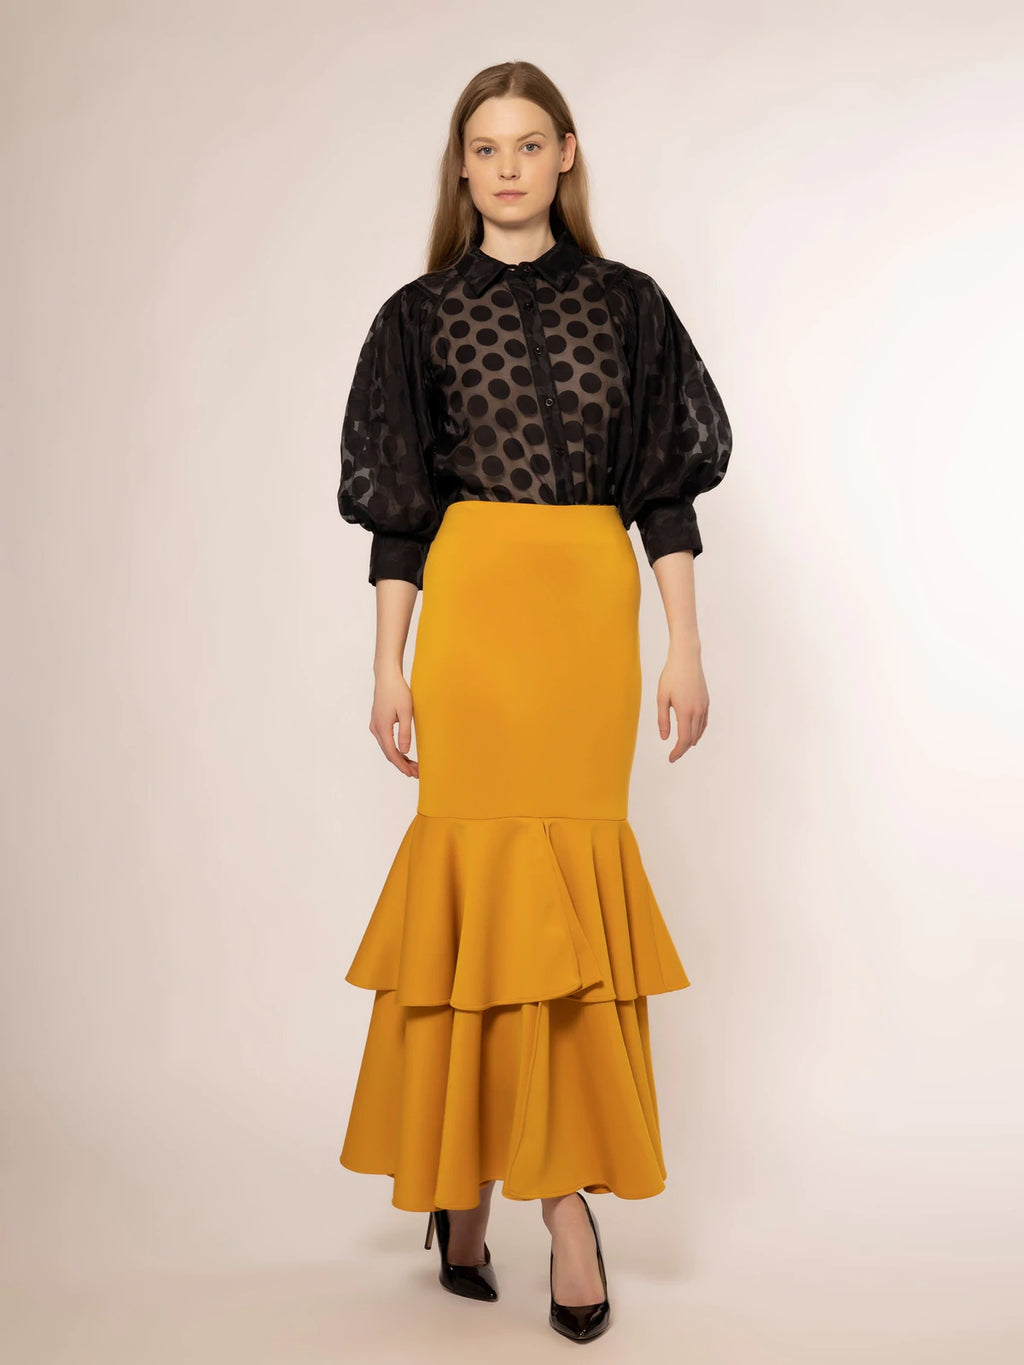 amp; Other Stories + Sheer Puff Sleeve Polka Dot Blouse